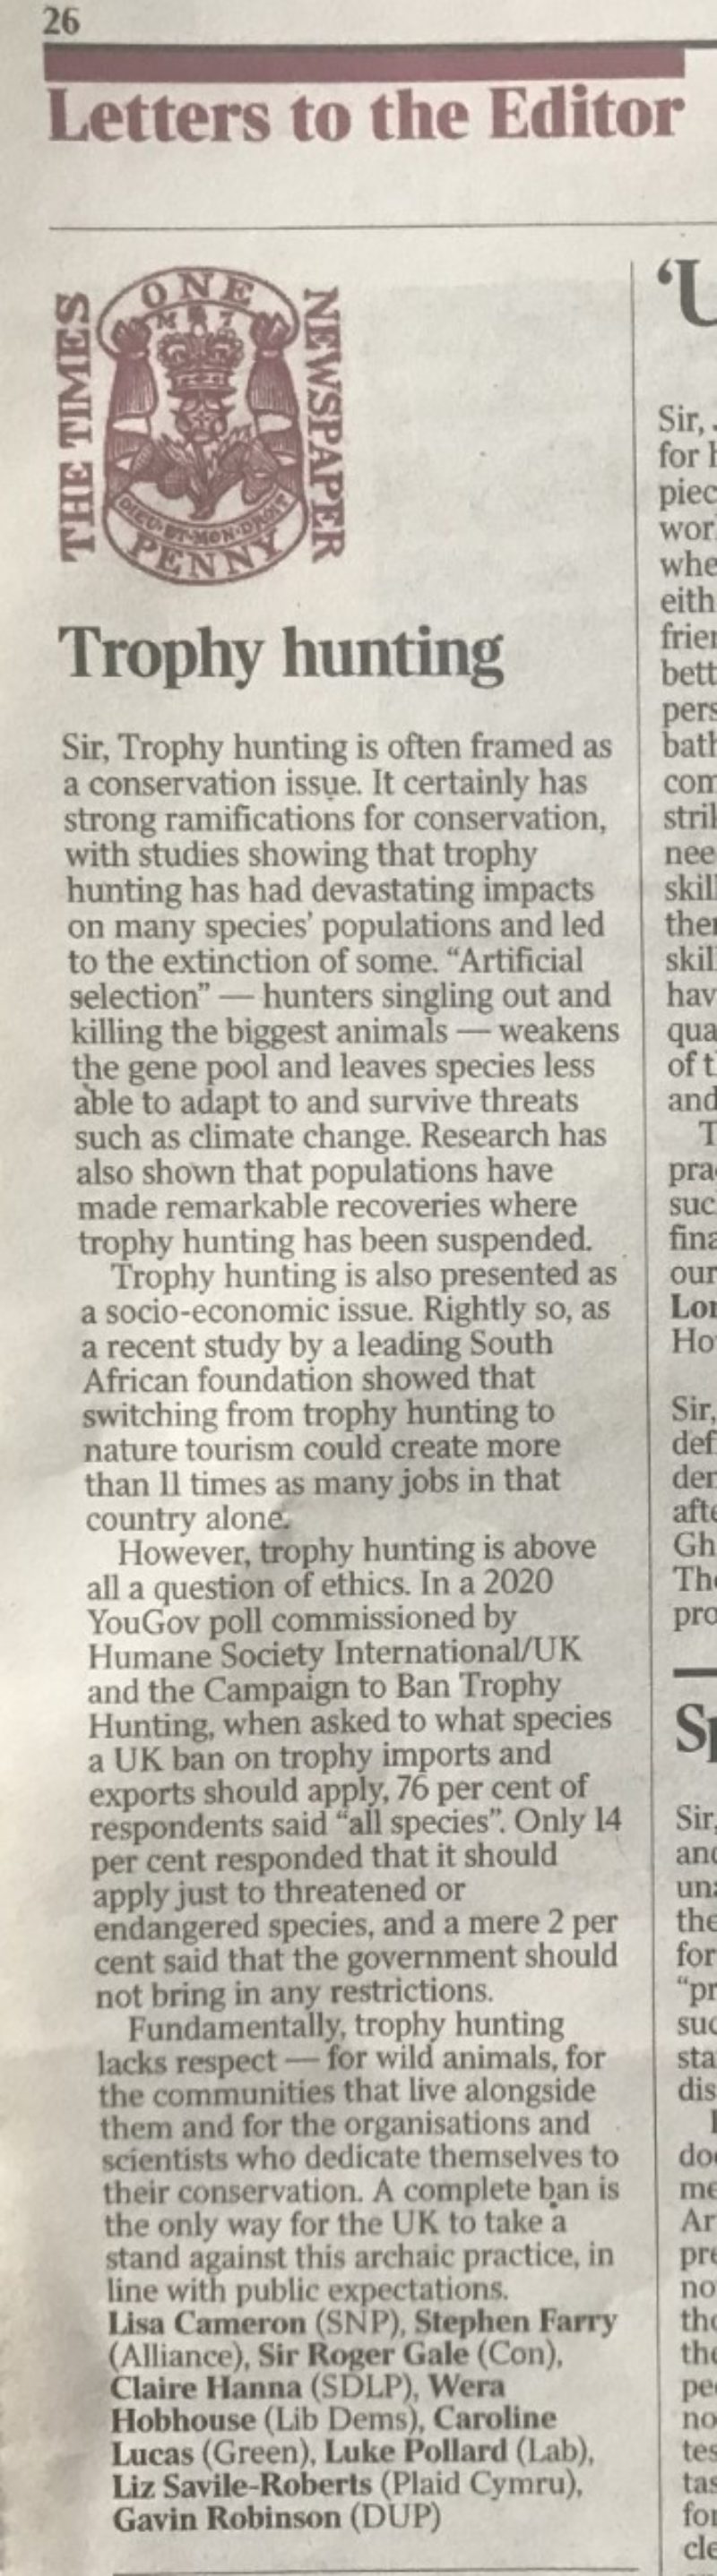 Campaign to Ban Trophy Hunting